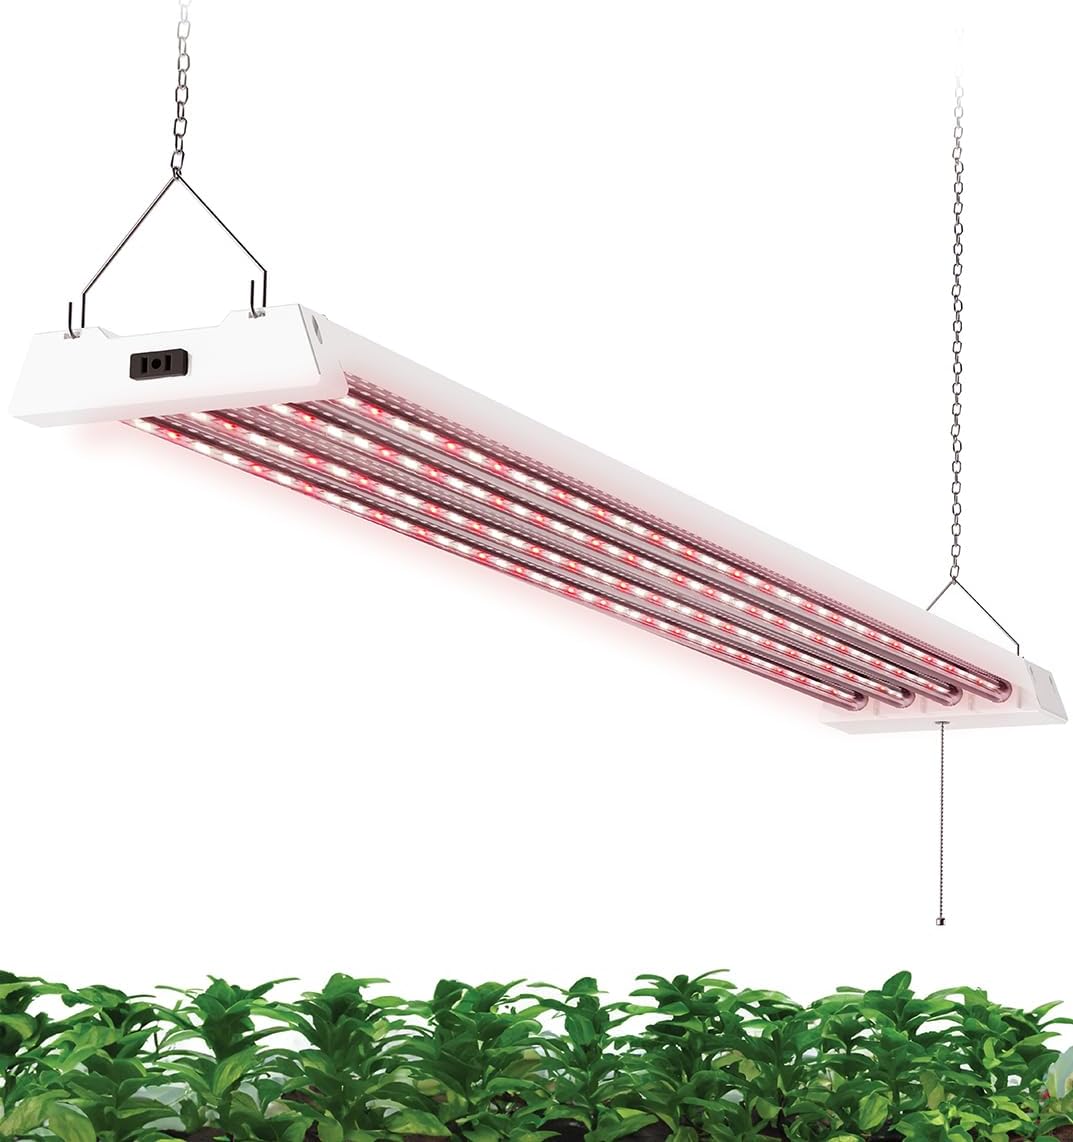 Sunco 4FT LED Grow Lights Full Spectrum for Indoor Plants 80W Integrated Suspended Fixture, Plug in Linkable for Indoor Greenhouse Year Round Plant Seedling Grow Lamp Super Bright